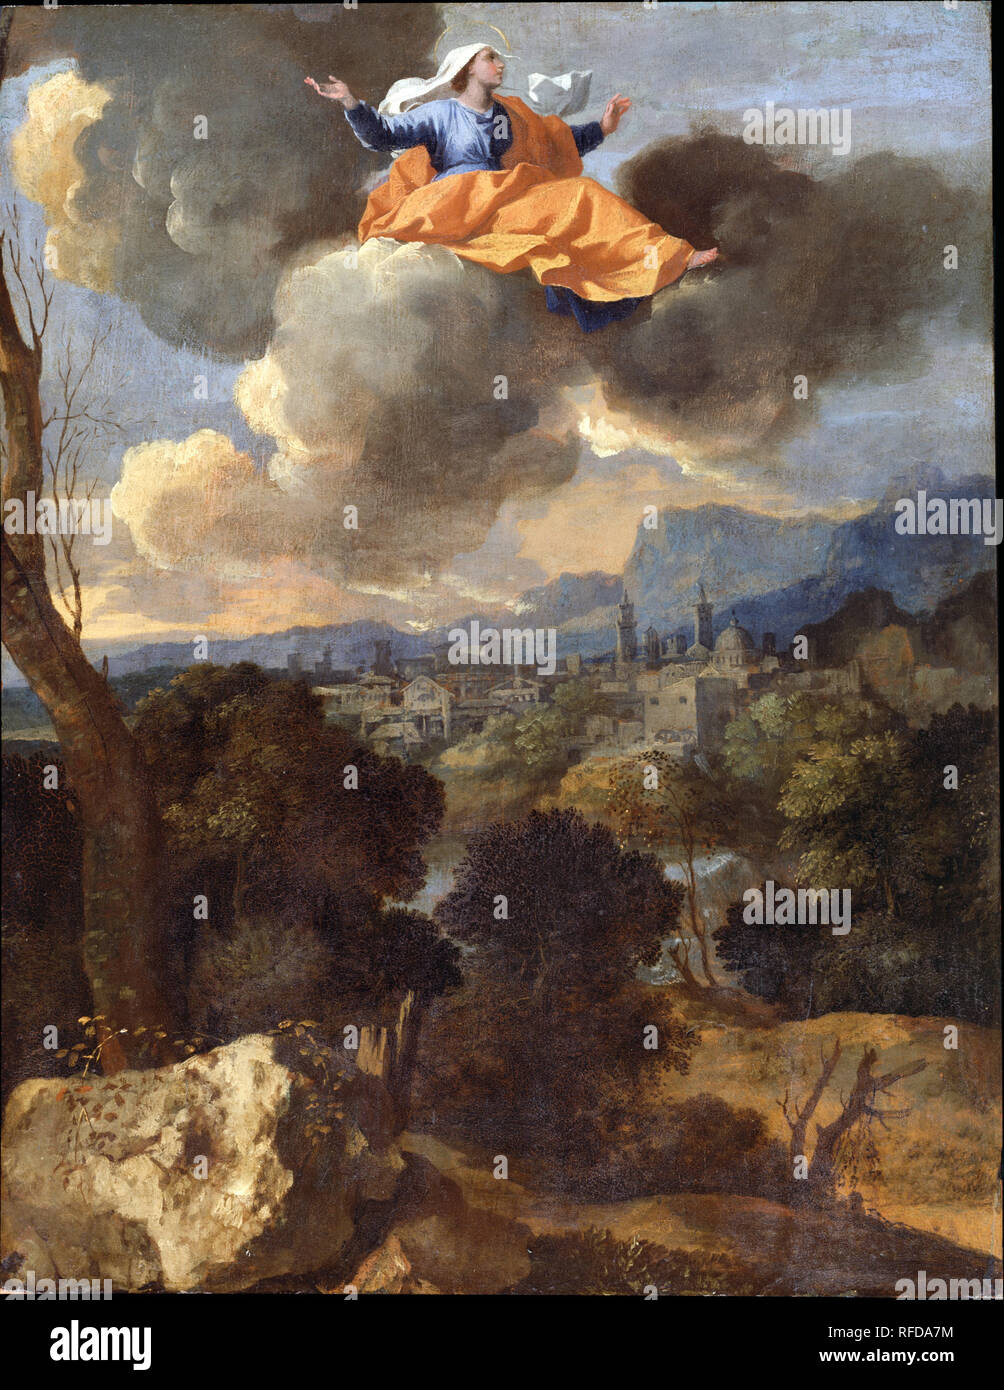 The Translation of Saint Rita of Cascia. Date/Period: Mid-1630s. Painting. Oil on panel Oil. Height: 488 mm (19.21 in); Width: 378 mm (14.88 in). Author: NICOLAS POUSSIN. Stock Photo